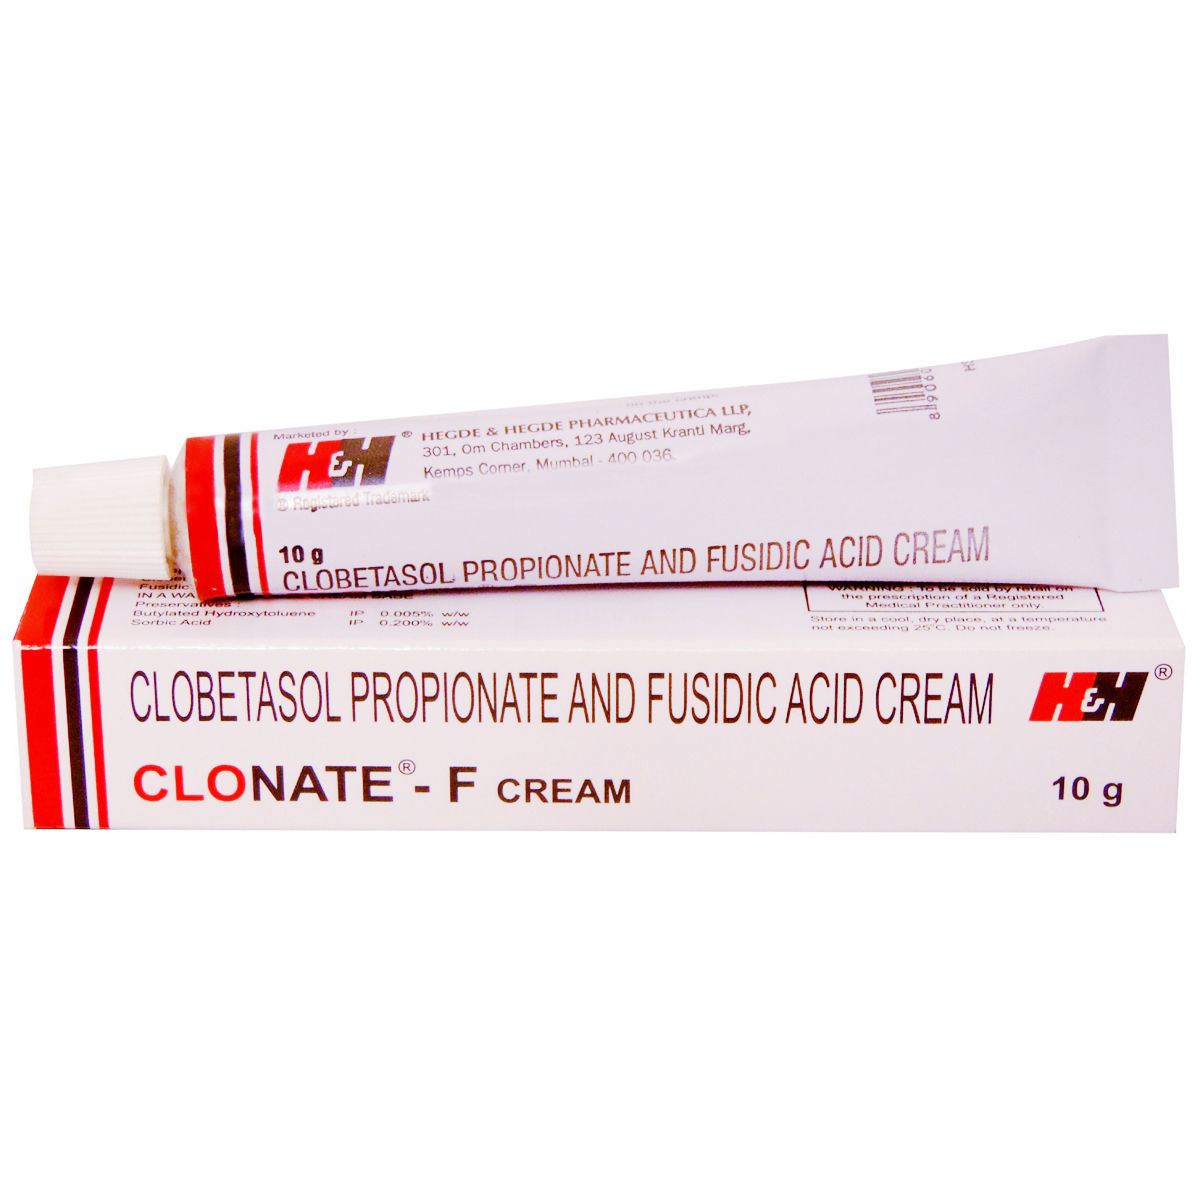 Clonate-F Cream 10 gm Price, Uses, Side Effects, Composition ...